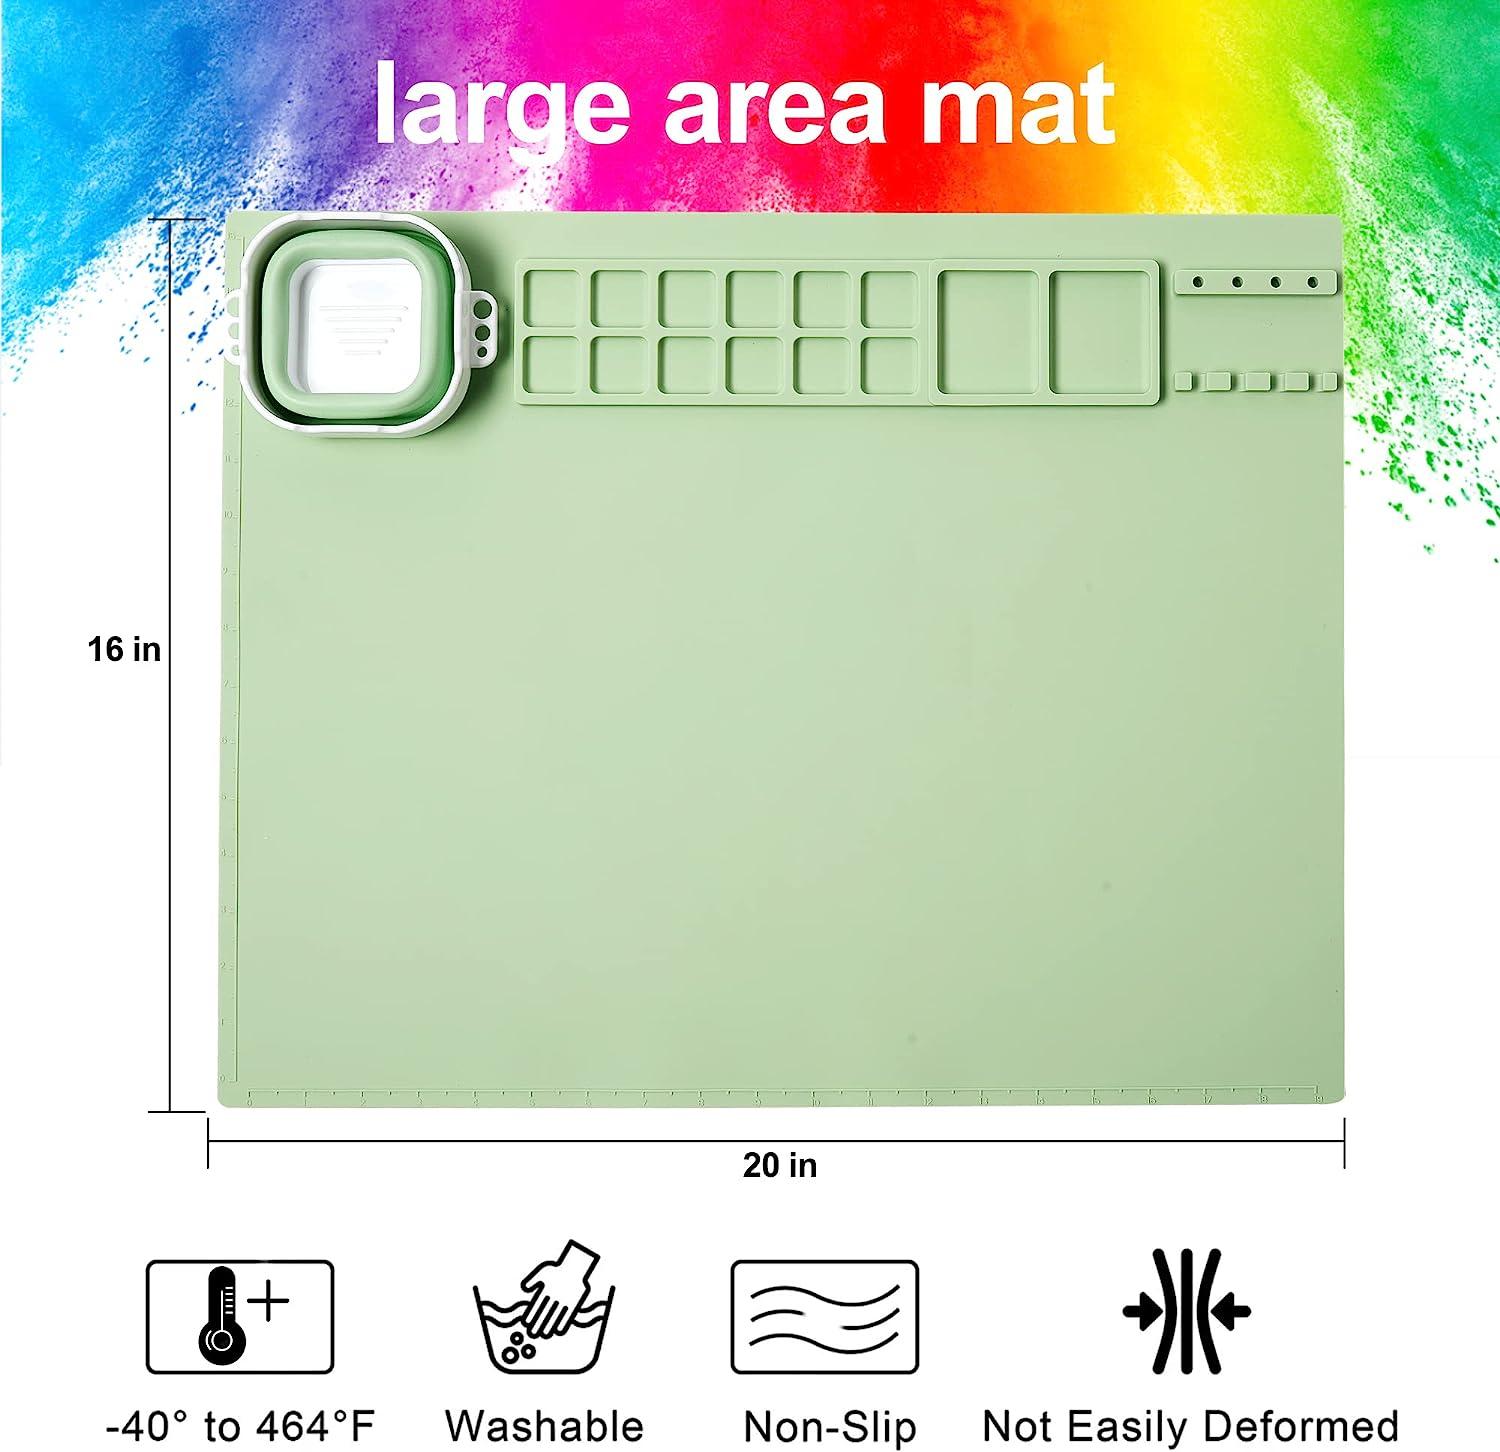 Awoke AWOKE Silicone Painting Mat - 20X16 Silicone Art Mat with 1 Water  Cup for Kids - Silcone Craft Mat has12 Color Dividers - 2 Pa